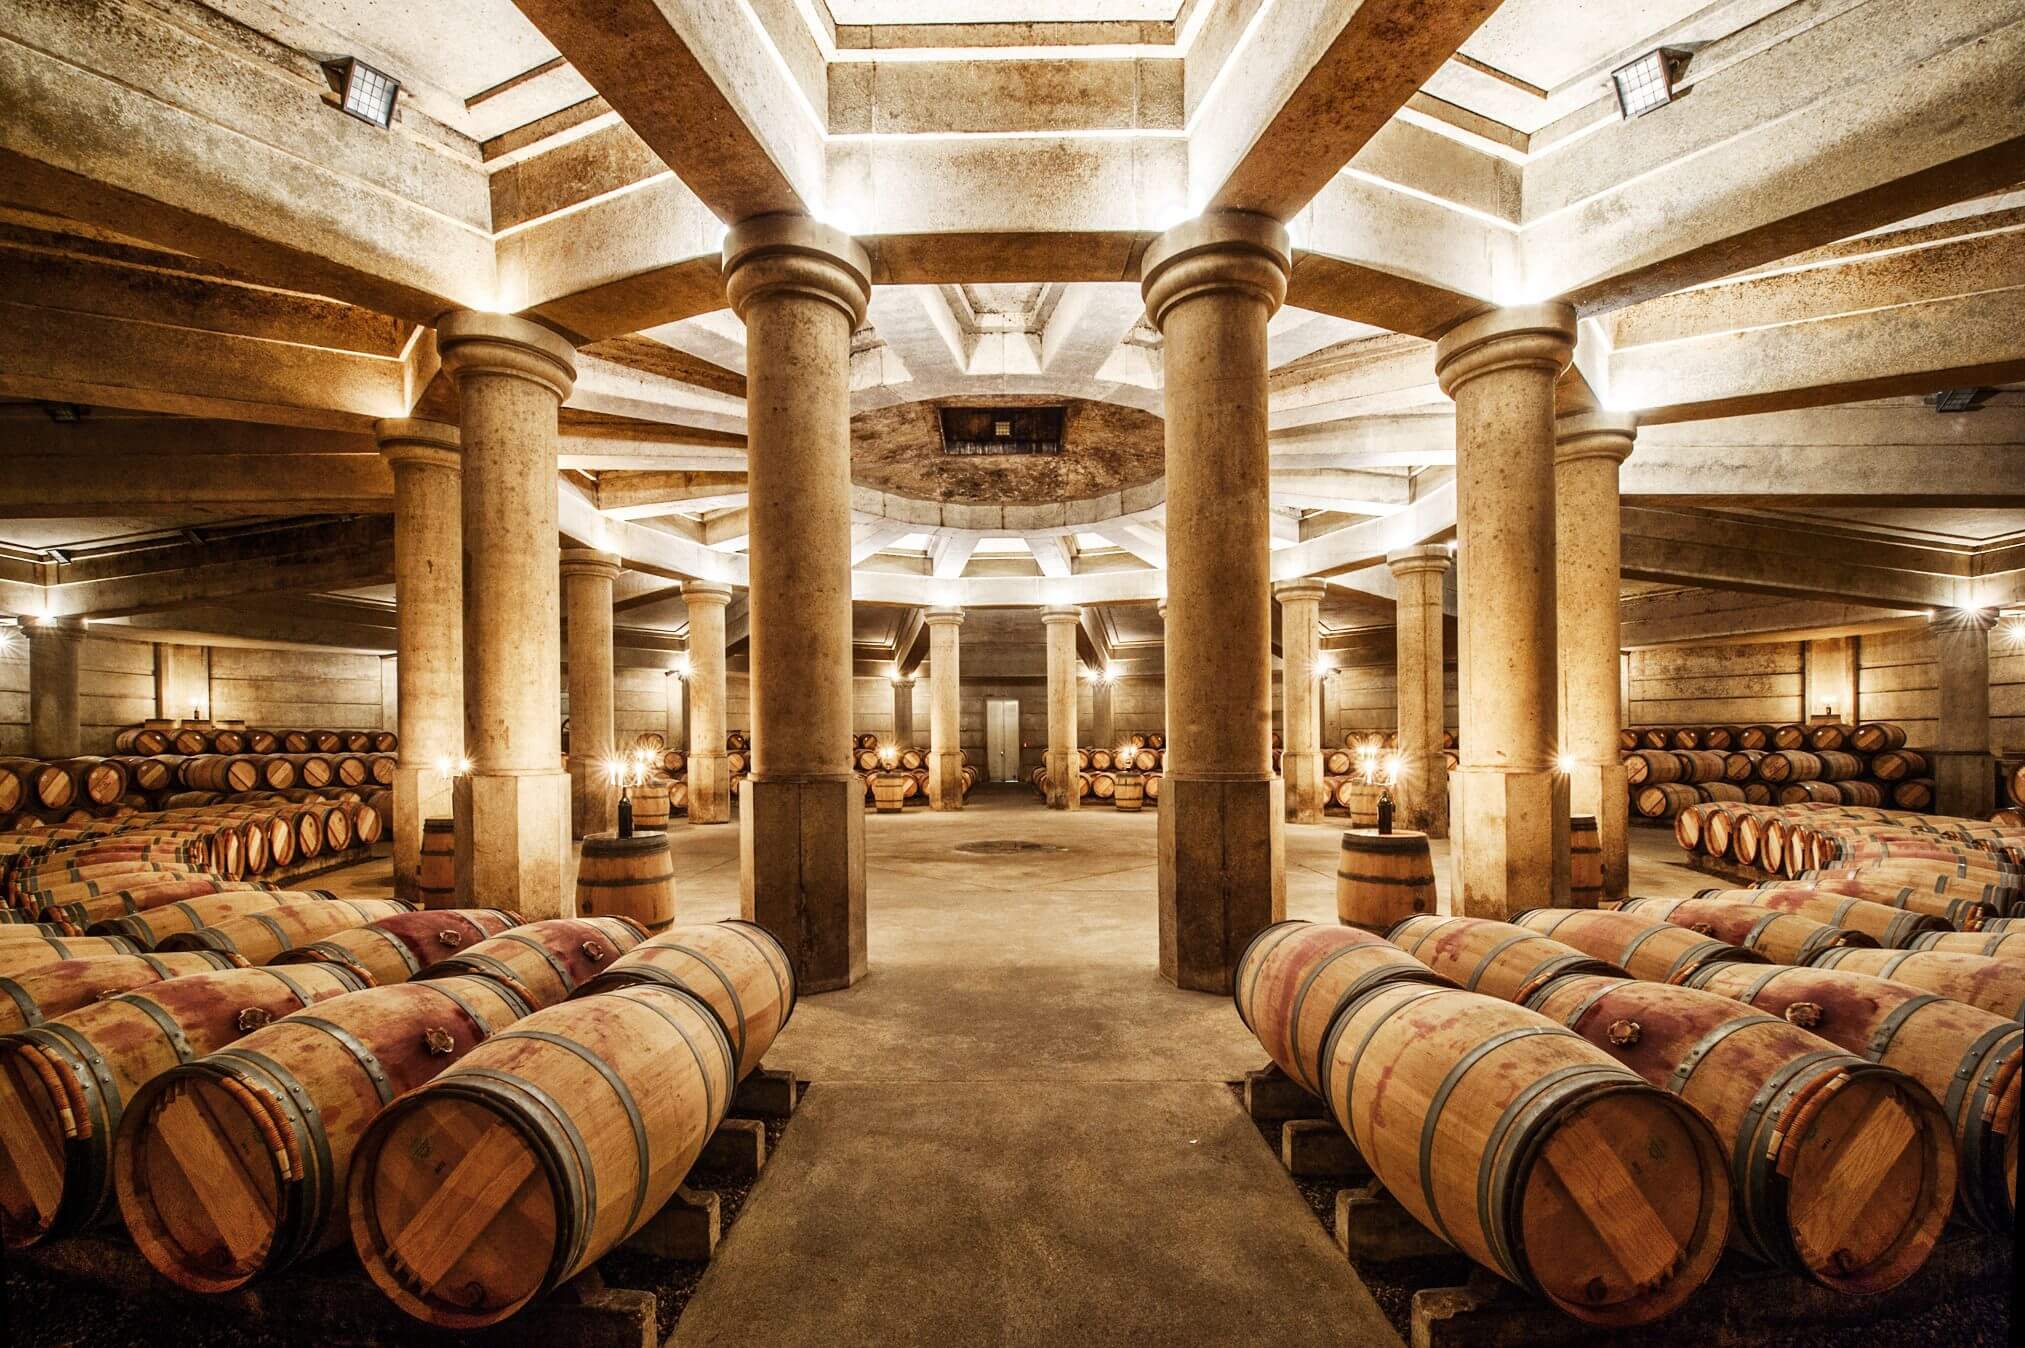 Domaines Barons de Rothschild (lafite) Winery